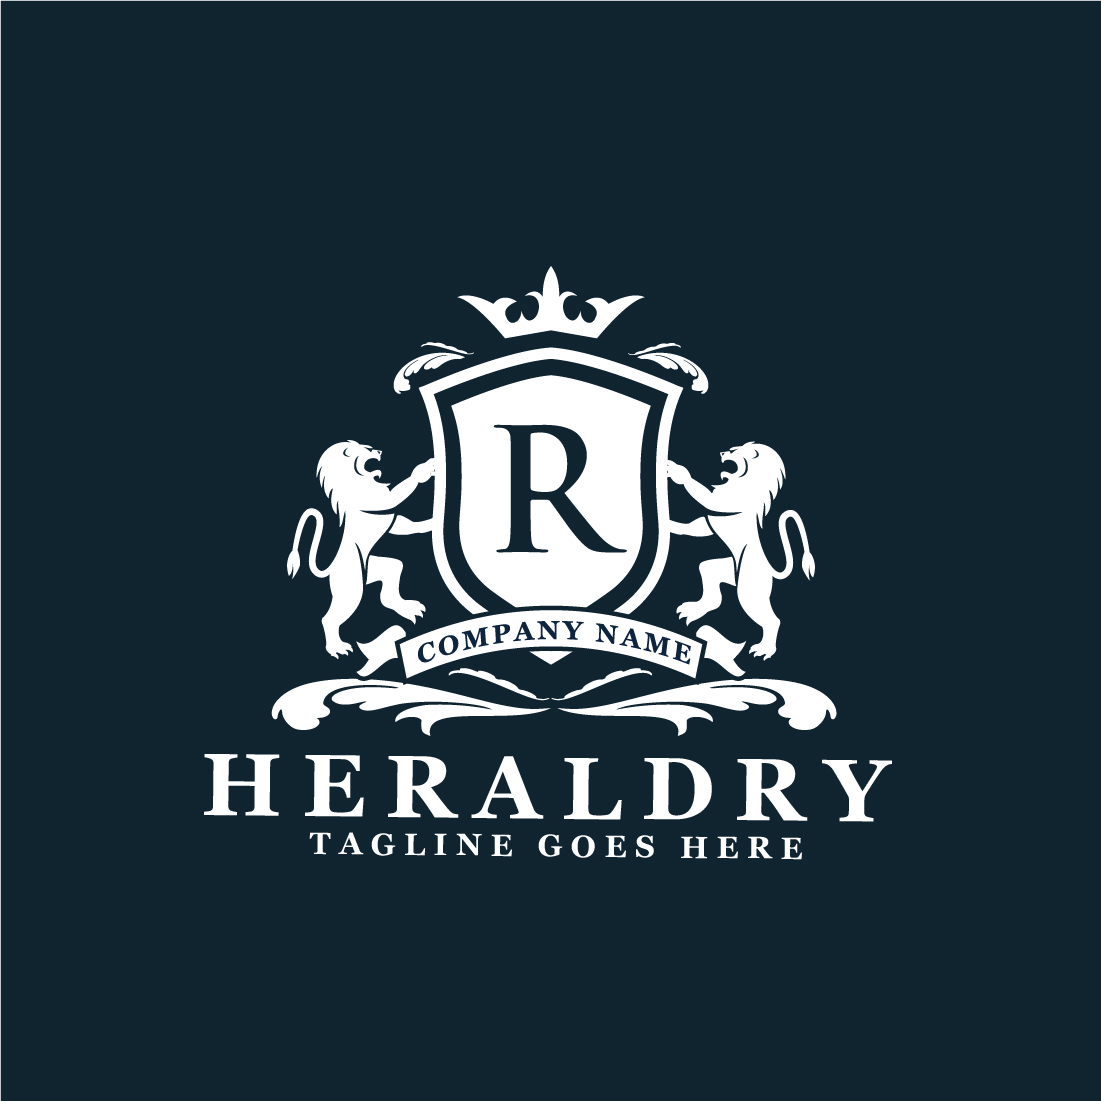 Logo for a company called heraldry.